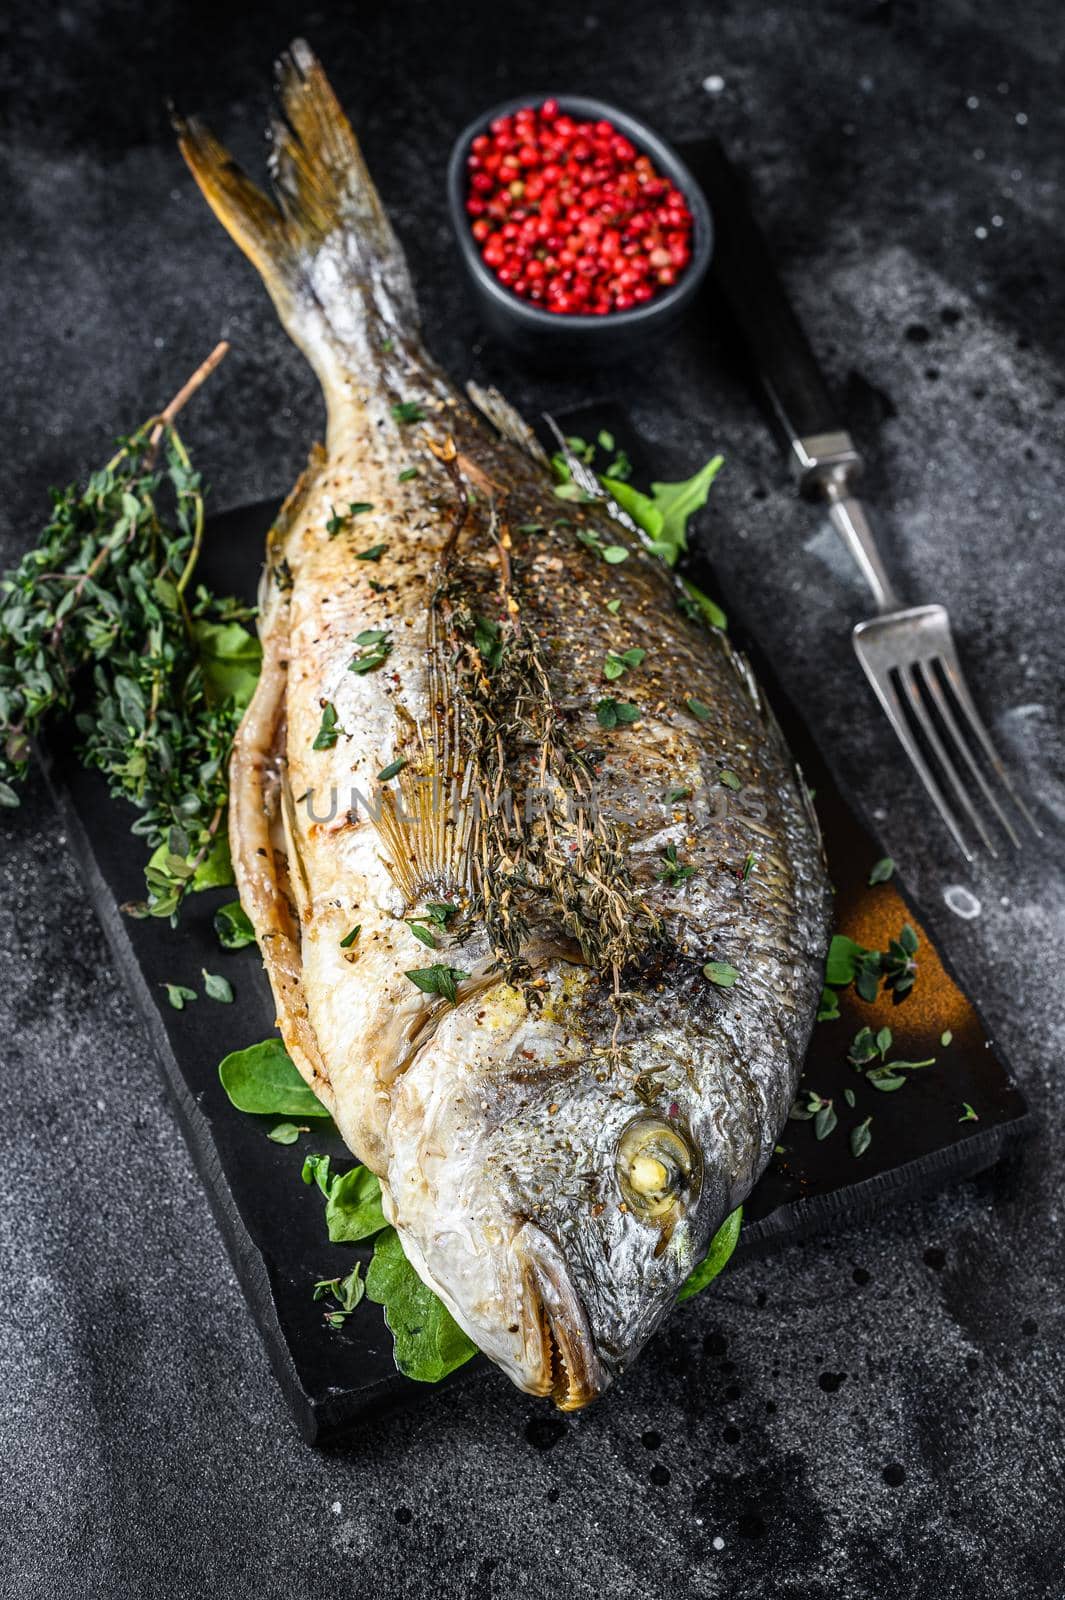 Roasted sea bream fish with herbs on a cutting board. Black background. Top view.